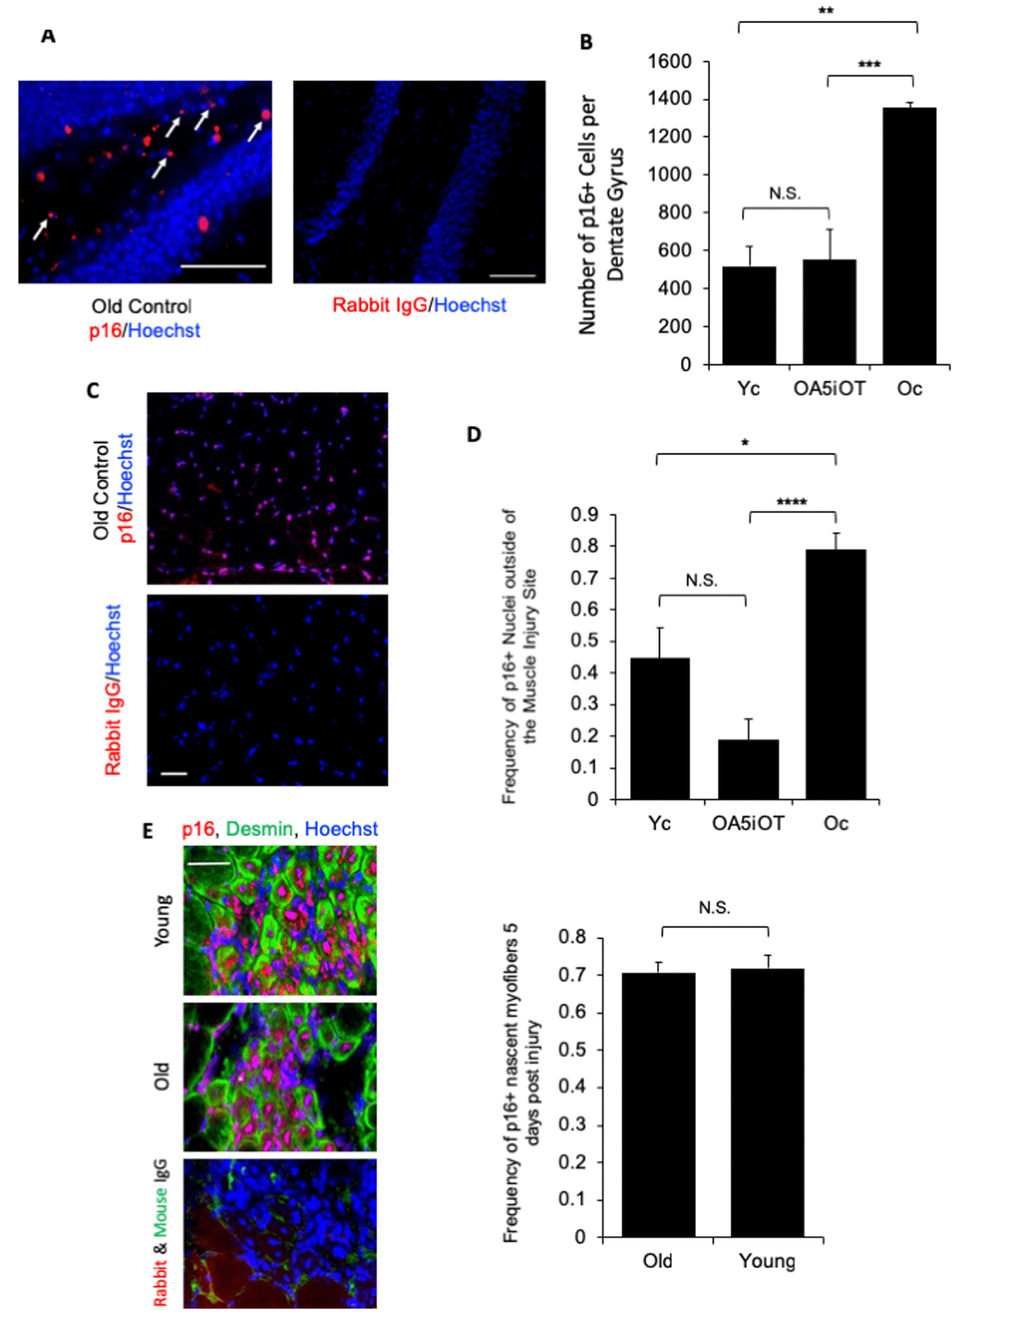 p16 levels are decreased in situ in muscle and brain by Alk5i+OT. Cryosections of injured and uninjured muscle (10 µm, each) and brain (25 µm) were assayed for the number of p16+ nuclei by immunofluorescence, using Hoechst to label all nuclei. p16 showed the predicted nuclear localization in these assays. (A) Representative images of p16+ cells in the polymorphic layer near the dentate gyrus in an old control brain and isotype-matched IgG non-specific immunofluorescence are shown. Arrows point to p16+ (red)/Hoechst+ (blue) nuclei in the stated region. (B) The number of p16+ cells in the polymorphic layer of the hippocampus was decreased by the Alk5i+OT treatment, ***old control & Alk5i+OT p=0.0003, scale bar=50 µm at 40x magnification, IgG scale bar=50 µm at 20x magnification. Young control (Yc) n=5, old control (Oc) n=8, Alk5i+OT (OA5iOT) n=8. (C) Representative images of p16+ nuclei outside of the injury site in the TA muscle of an old vehicle control mouse at 5 days post single CTX injection and isotype-matched IgG non- specific immunofluorescence, are shown; scale bar=50 µm at 20x magnification. (D) The number of p16+/Hoechst+ nuclei divided by the total number of nuclei (Hoechst+) per field-of-view at 20x magnification (frequency of p16+ nuclei) was quantified. The frequency of p16+ nuclei outside of injury sites is significantly greater in muscle of old vehicle-treated control mice, as compared to young control and old Alk5i+OT treated. N=5 for each cohort. Young control (Yc), old+Alk5i+OT (OA5iOT), old control (Oc) N.S. = P-value Yc &OA5iOT = 0.064, *** = P-value Yc & Oc = 0.011, **** = P-value OA5iOT & Oc = 0.000064. (E) Representative images of the sites of injury/regeneration of young and old TA muscle from control - HBSS treated mice; 10-micron sections desmin (green), p16 (red) immunofluorescence and isotype-matched IgG control non-specific immune-fluorescence, are shown. Scale bar is 50 micron at 40x magnification. Robust p16+ nuclei are observed in both young and old muscle, and many of these are in centrally-nucleated newly formed desminhigh myofibers. The frequency of p16+ centrally-nucleated myofibers was quantified (right). The relative number of these p16+ fibers were found to be nearly identical in young injured (n=5) and old injured (n=7) muscle. N.S. = P-value Old and Young = 0.7918.